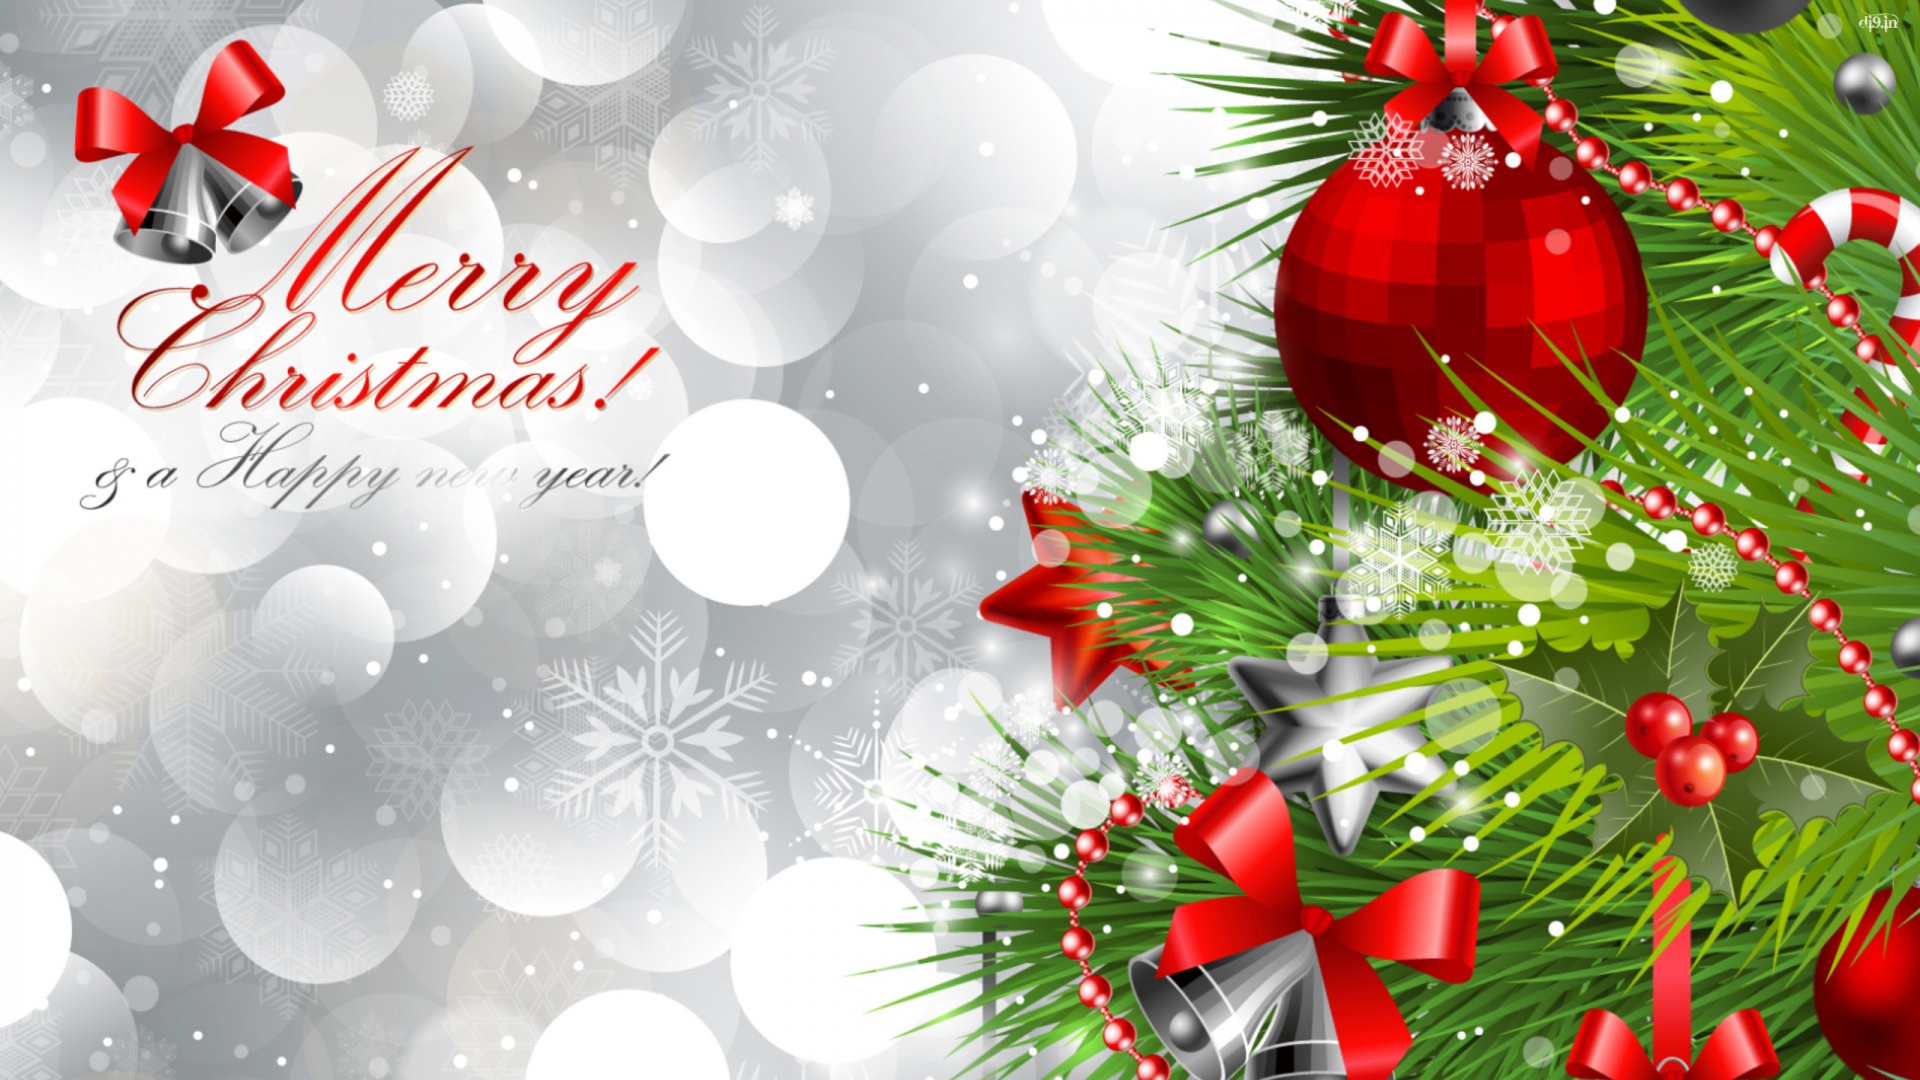 Christmas Eve Background Images HD Pictures and Wallpaper For Free  Download  Pngtree